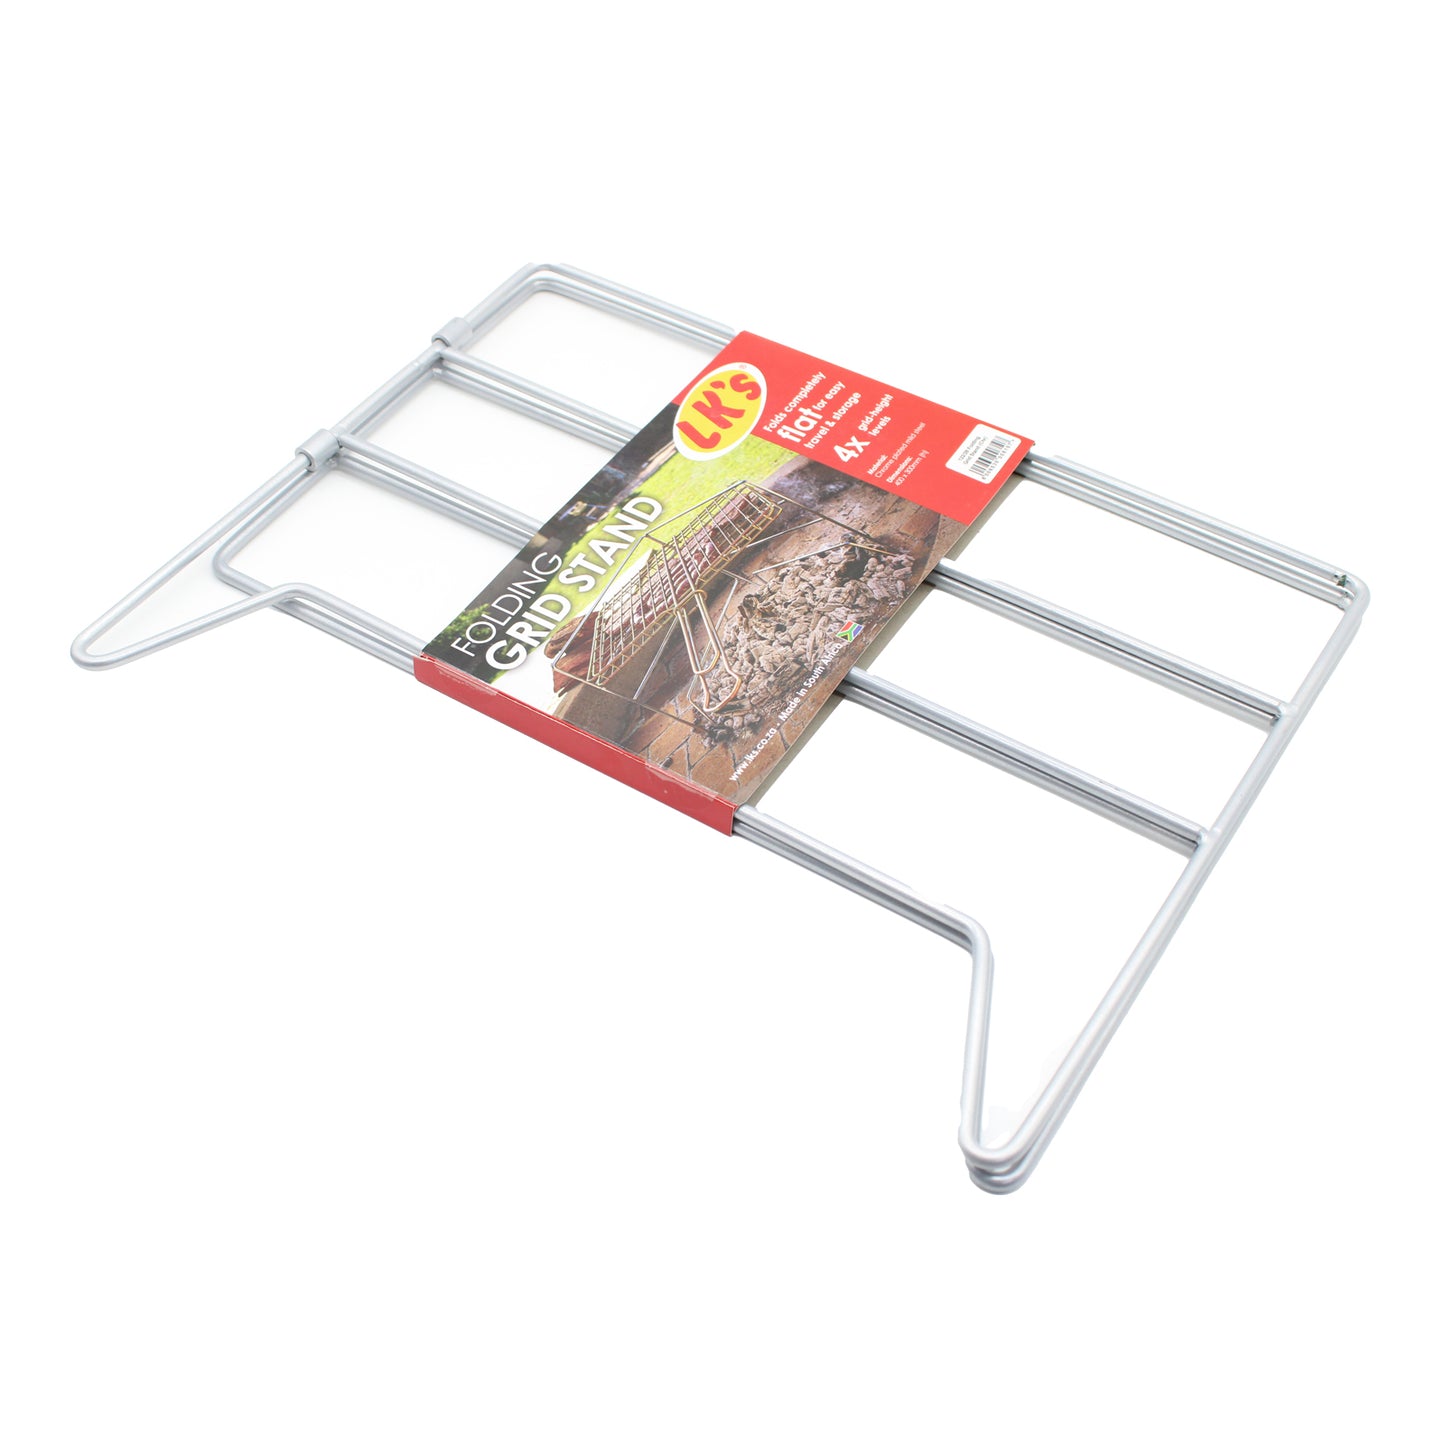 Folding Grid Stand for Braai, Barbecue and Campfire Cooking